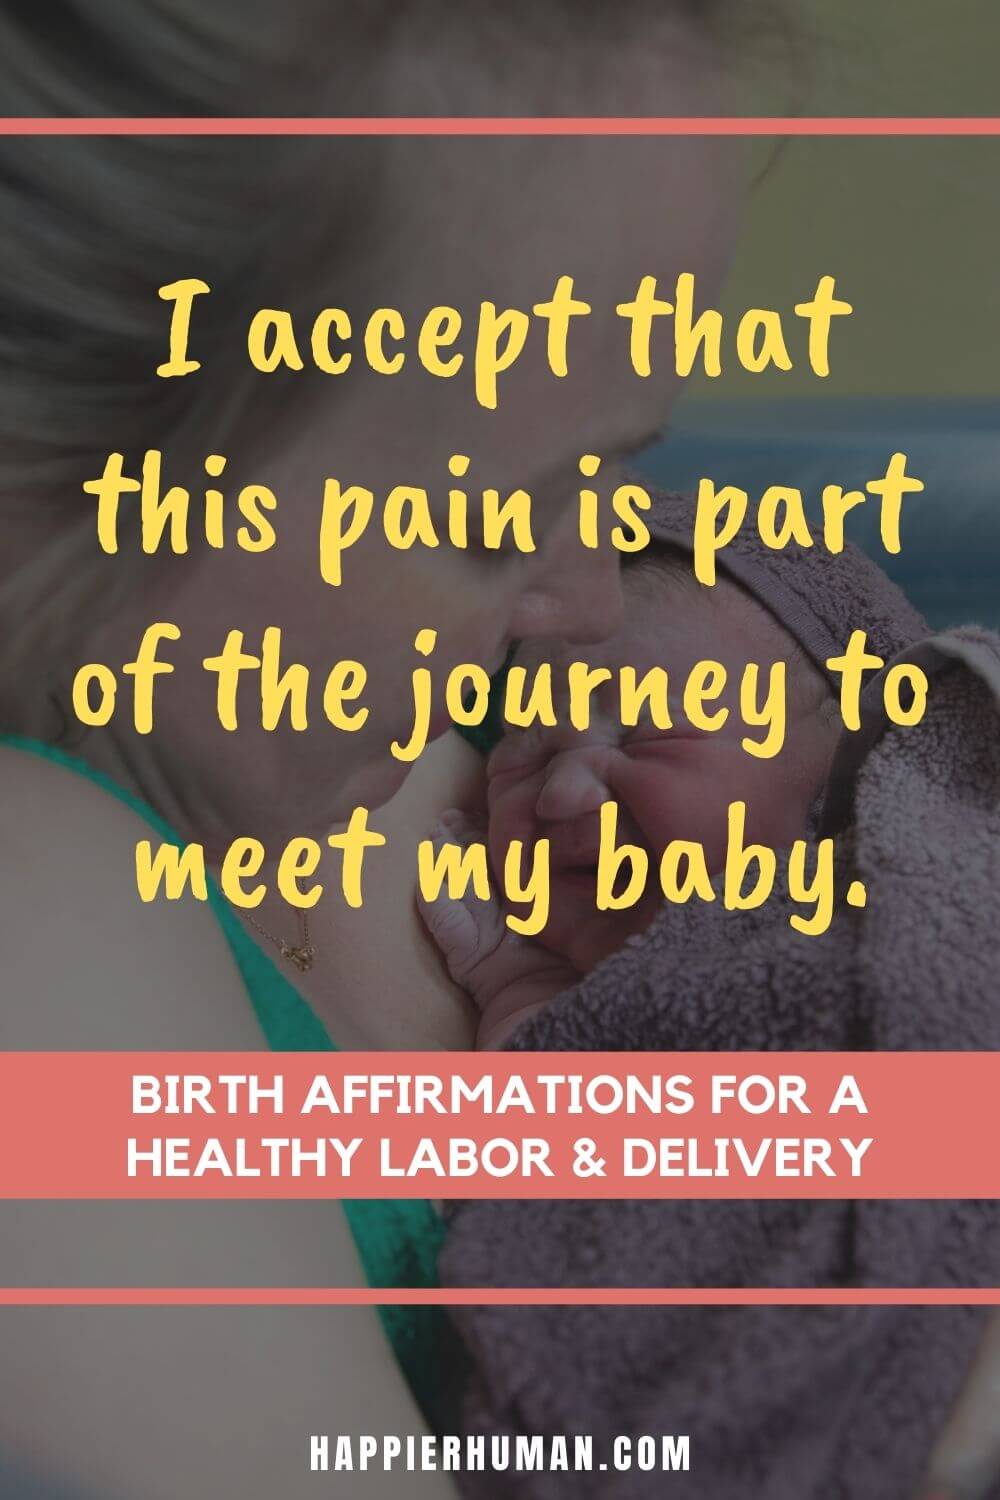 Birth Affirmations - I accept that this pain is part of the journey to meet my baby. | birth affirmations pdf | home birth affirmations | christian birth affirmations